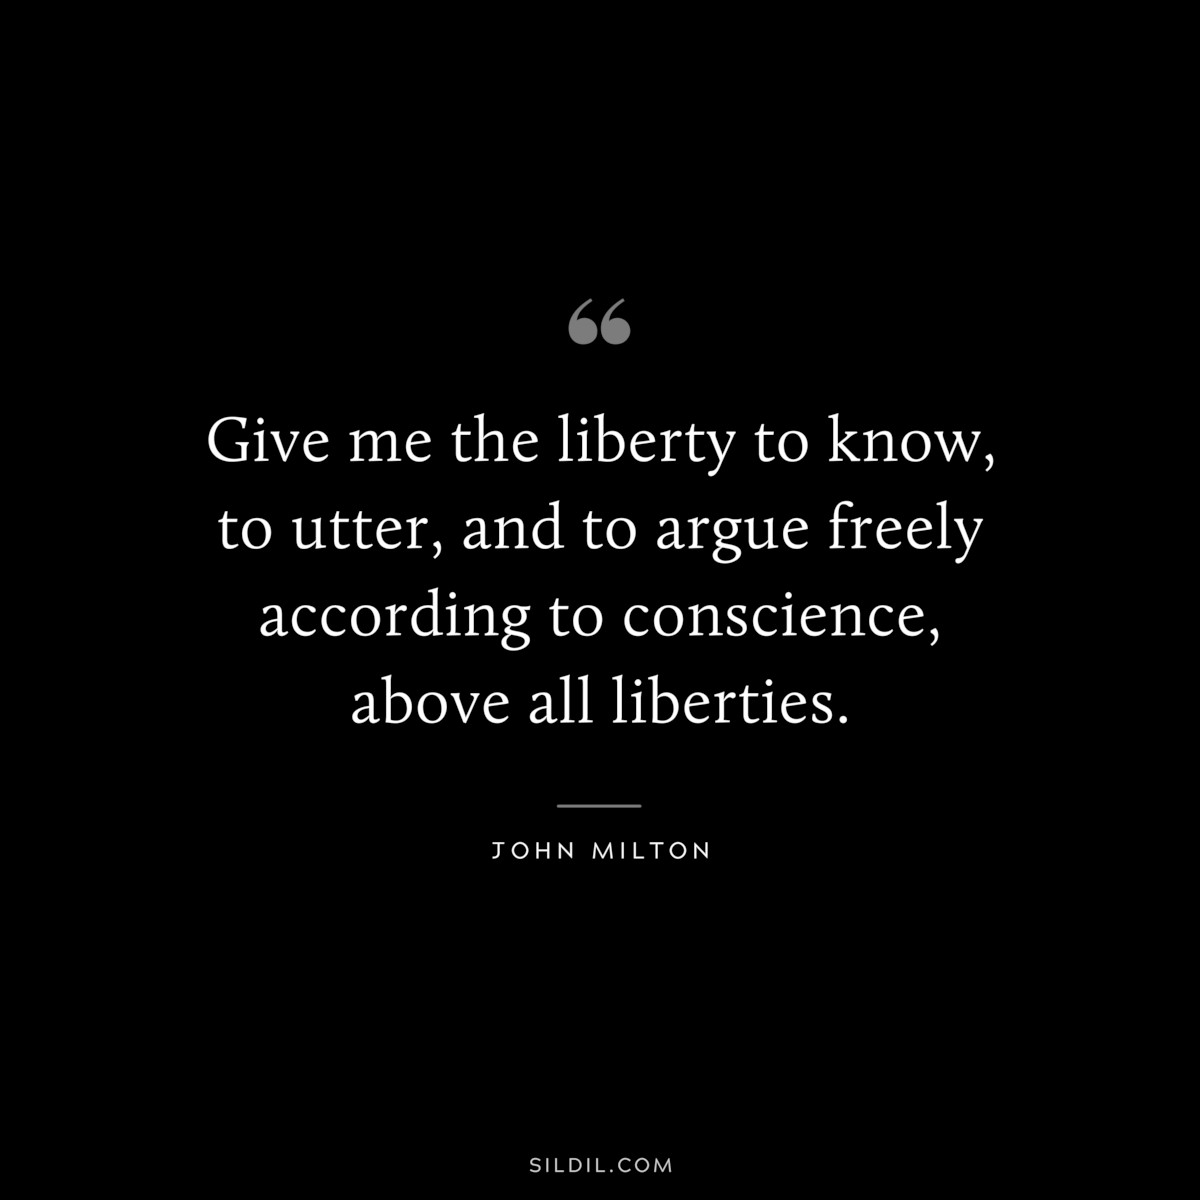 Give me the liberty to know, to utter, and to argue freely according to conscience, above all liberties. ― John Milton